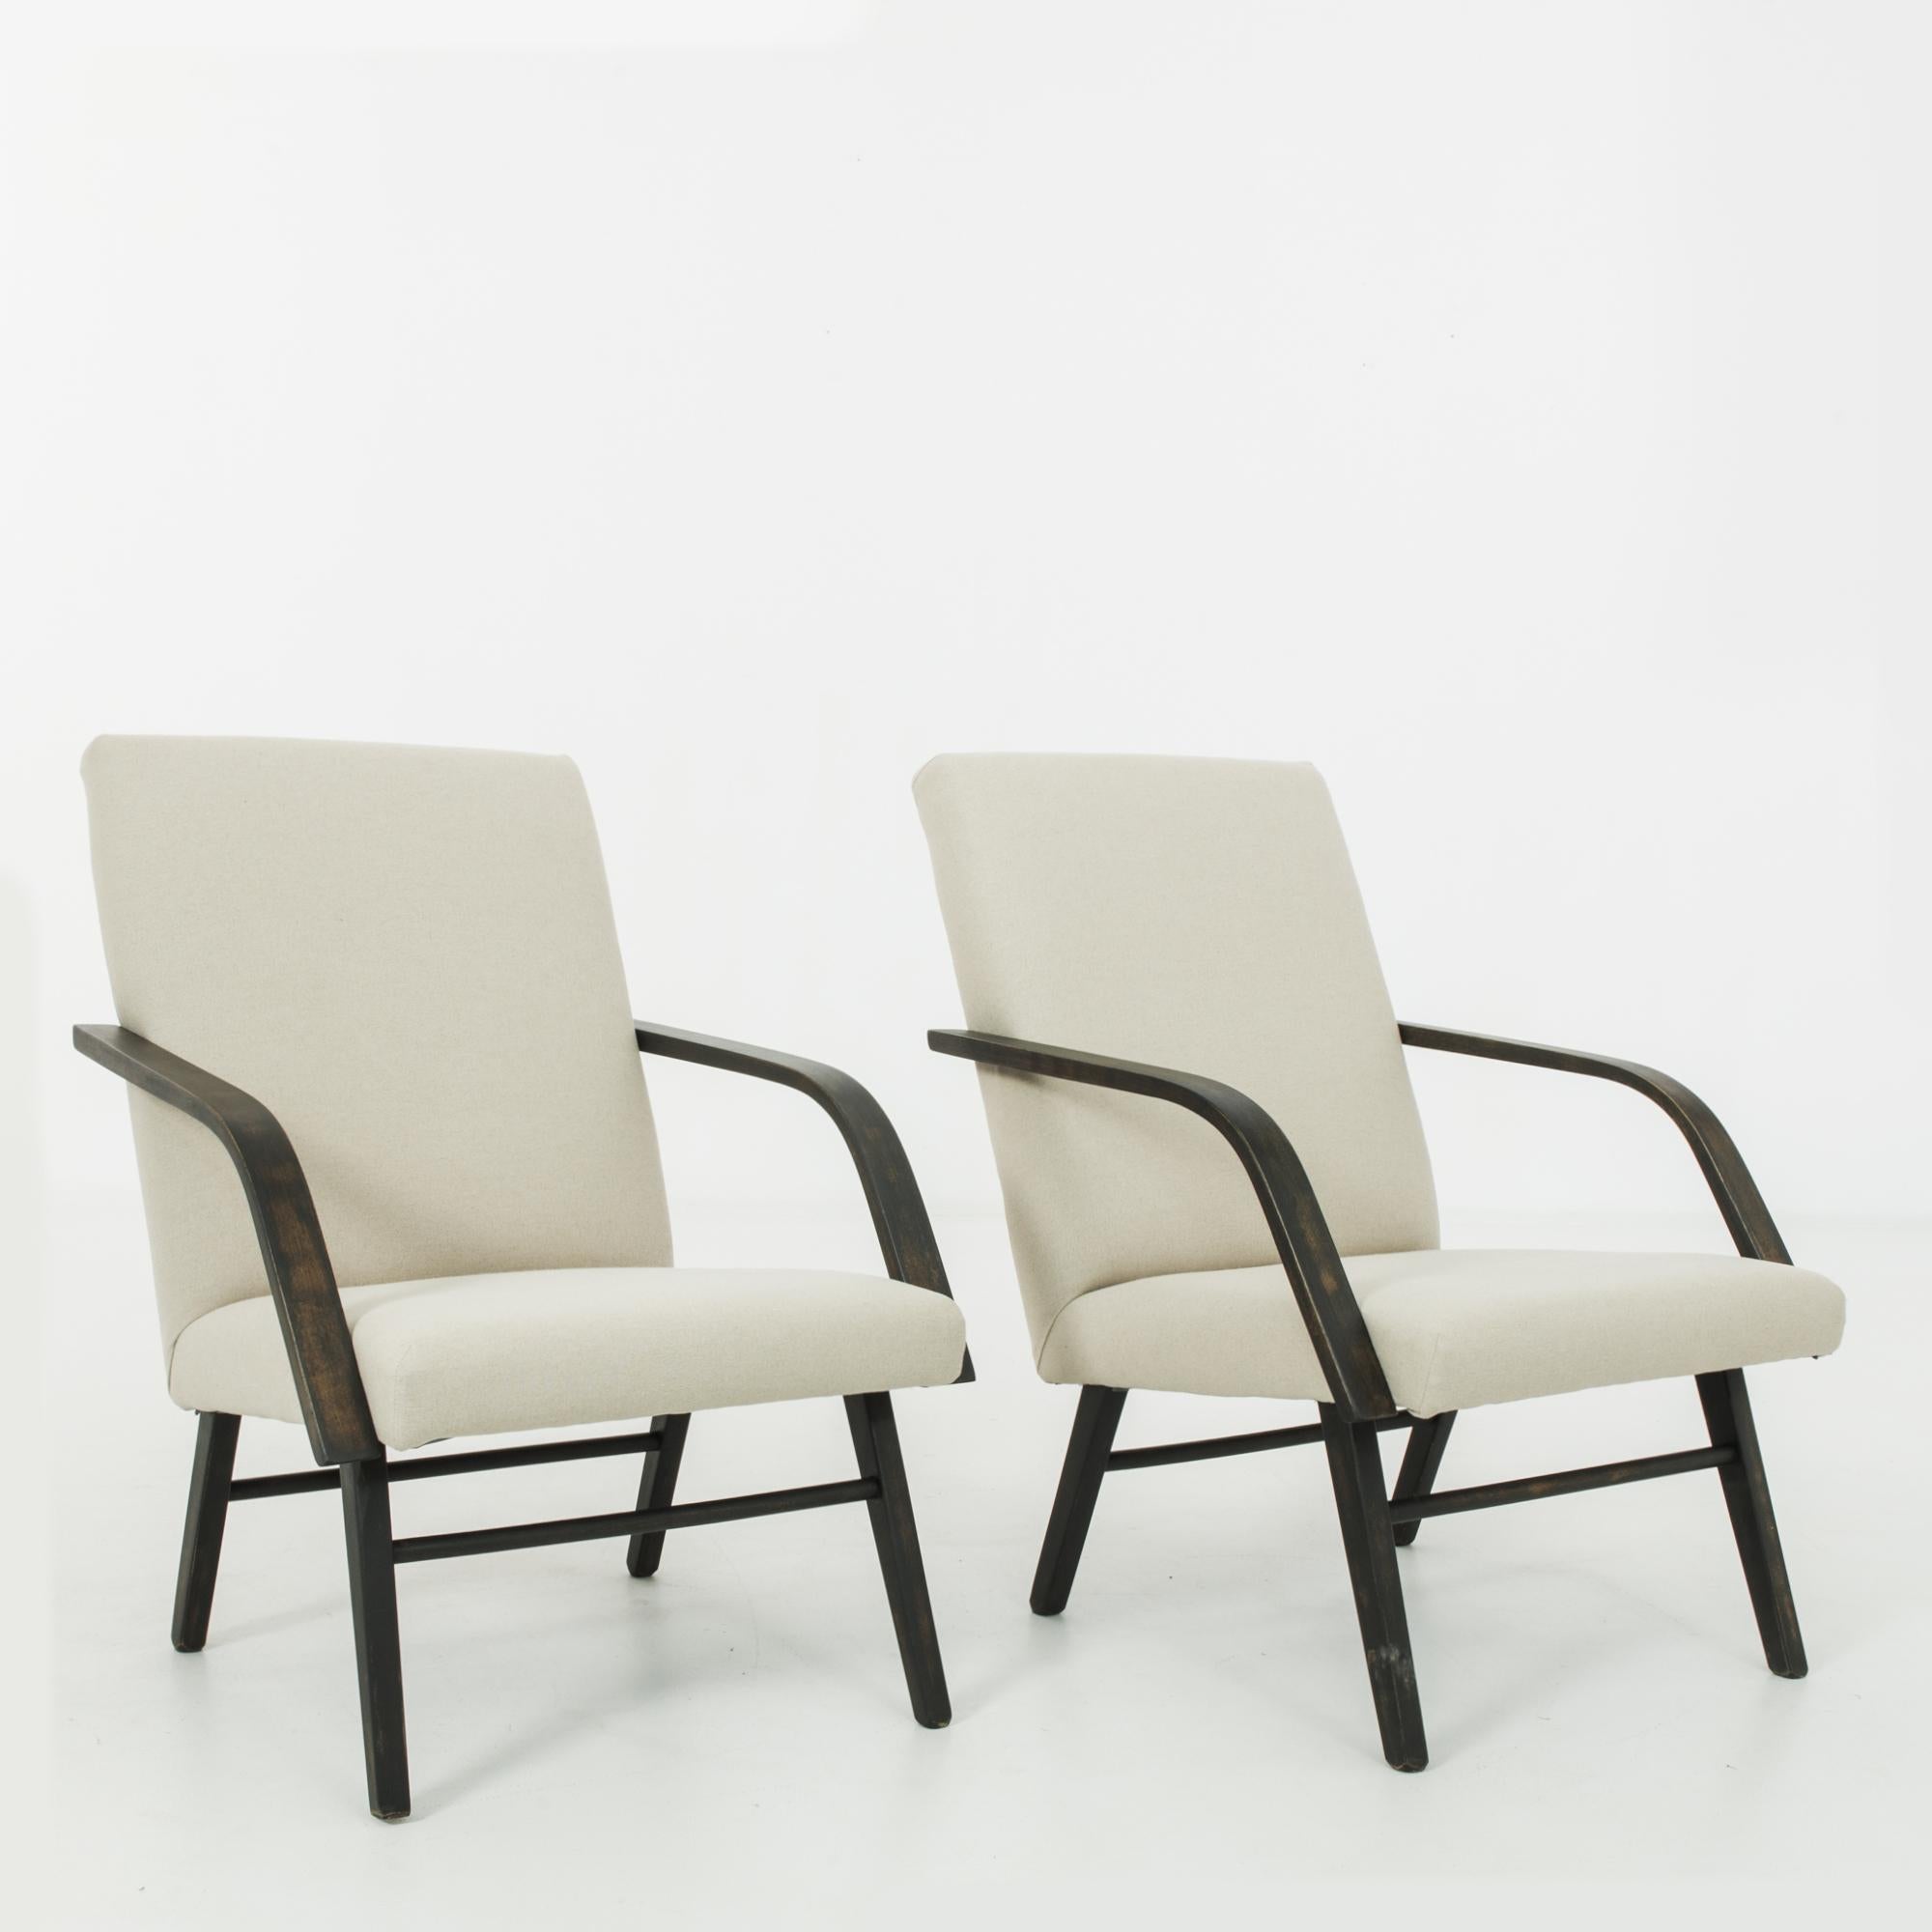 Mid-Century Modern 1960s Czechoslovakian Angular Upholstered Lounge Chairs, a Pair For Sale